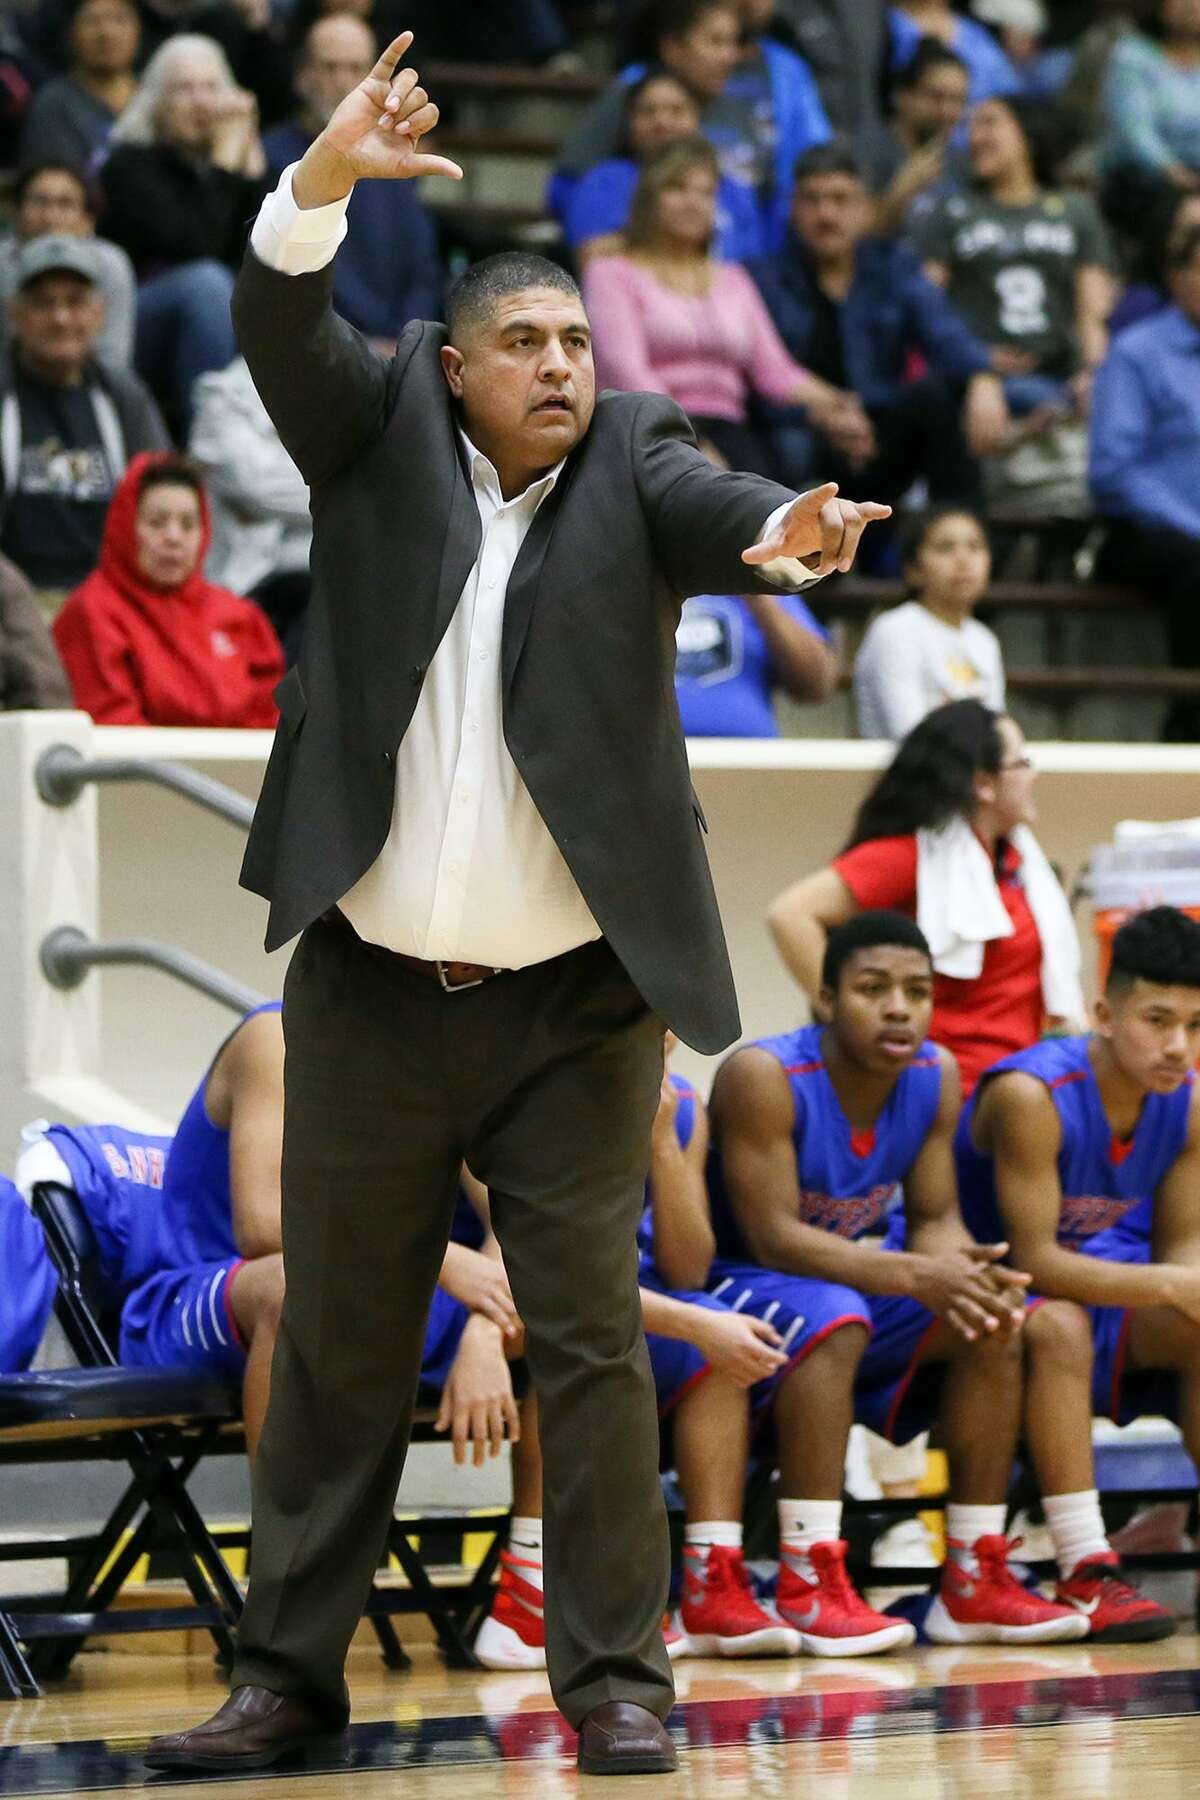 Jefferson basketball coach Art Vela is optimistic as he heads into his second season at the helm.